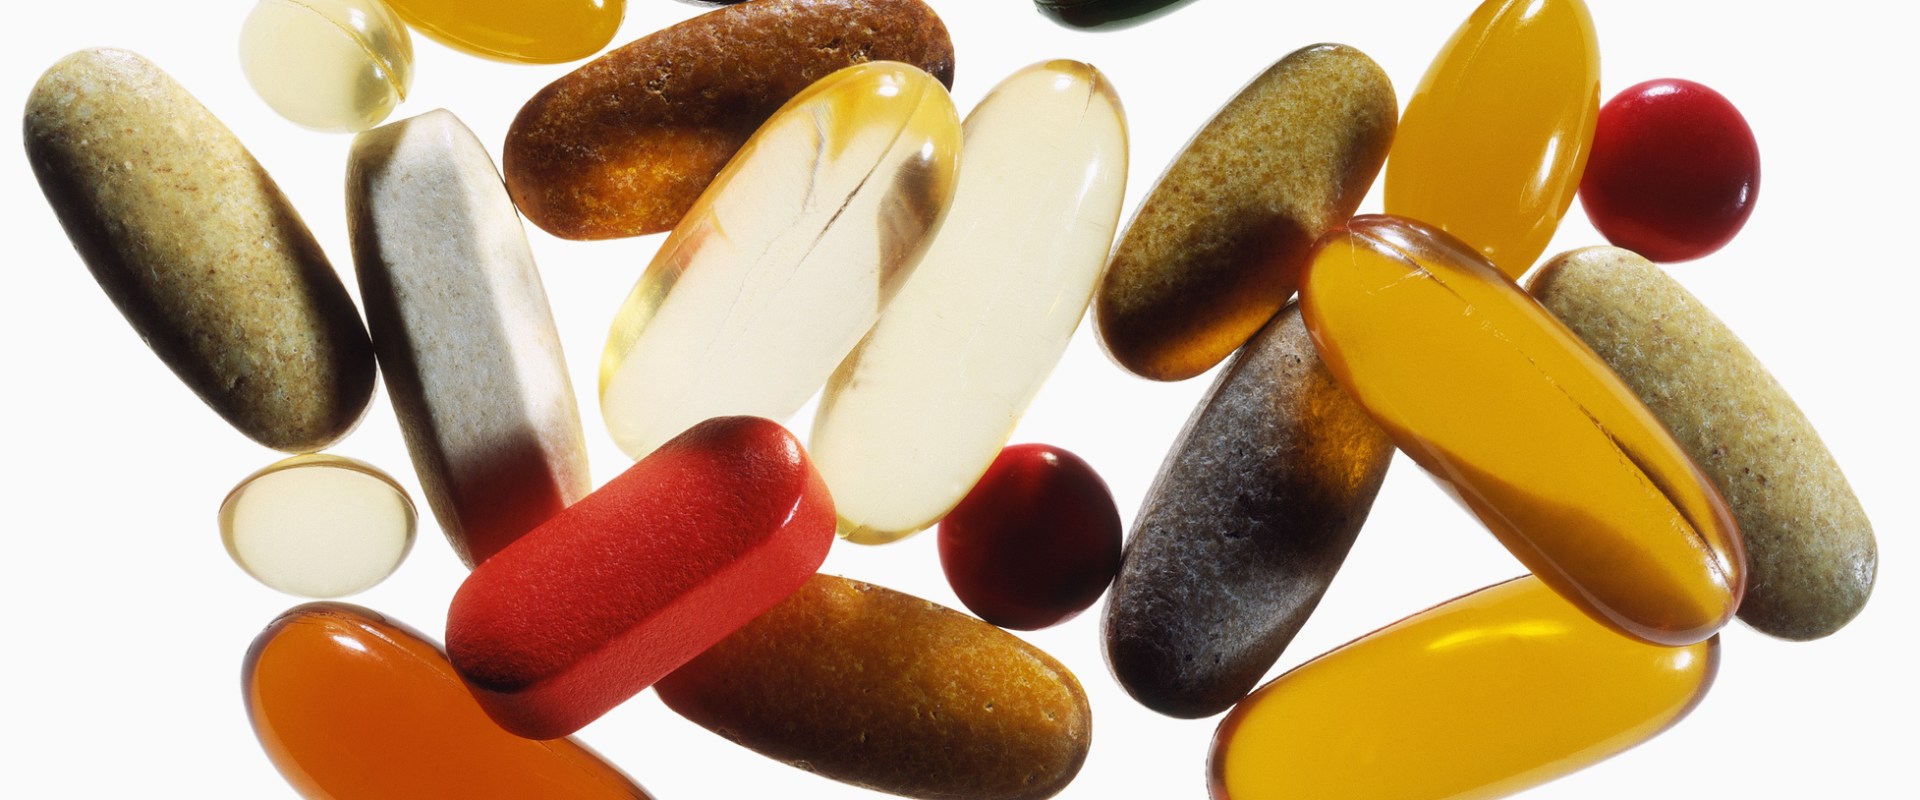 Are health supplements safe to take?